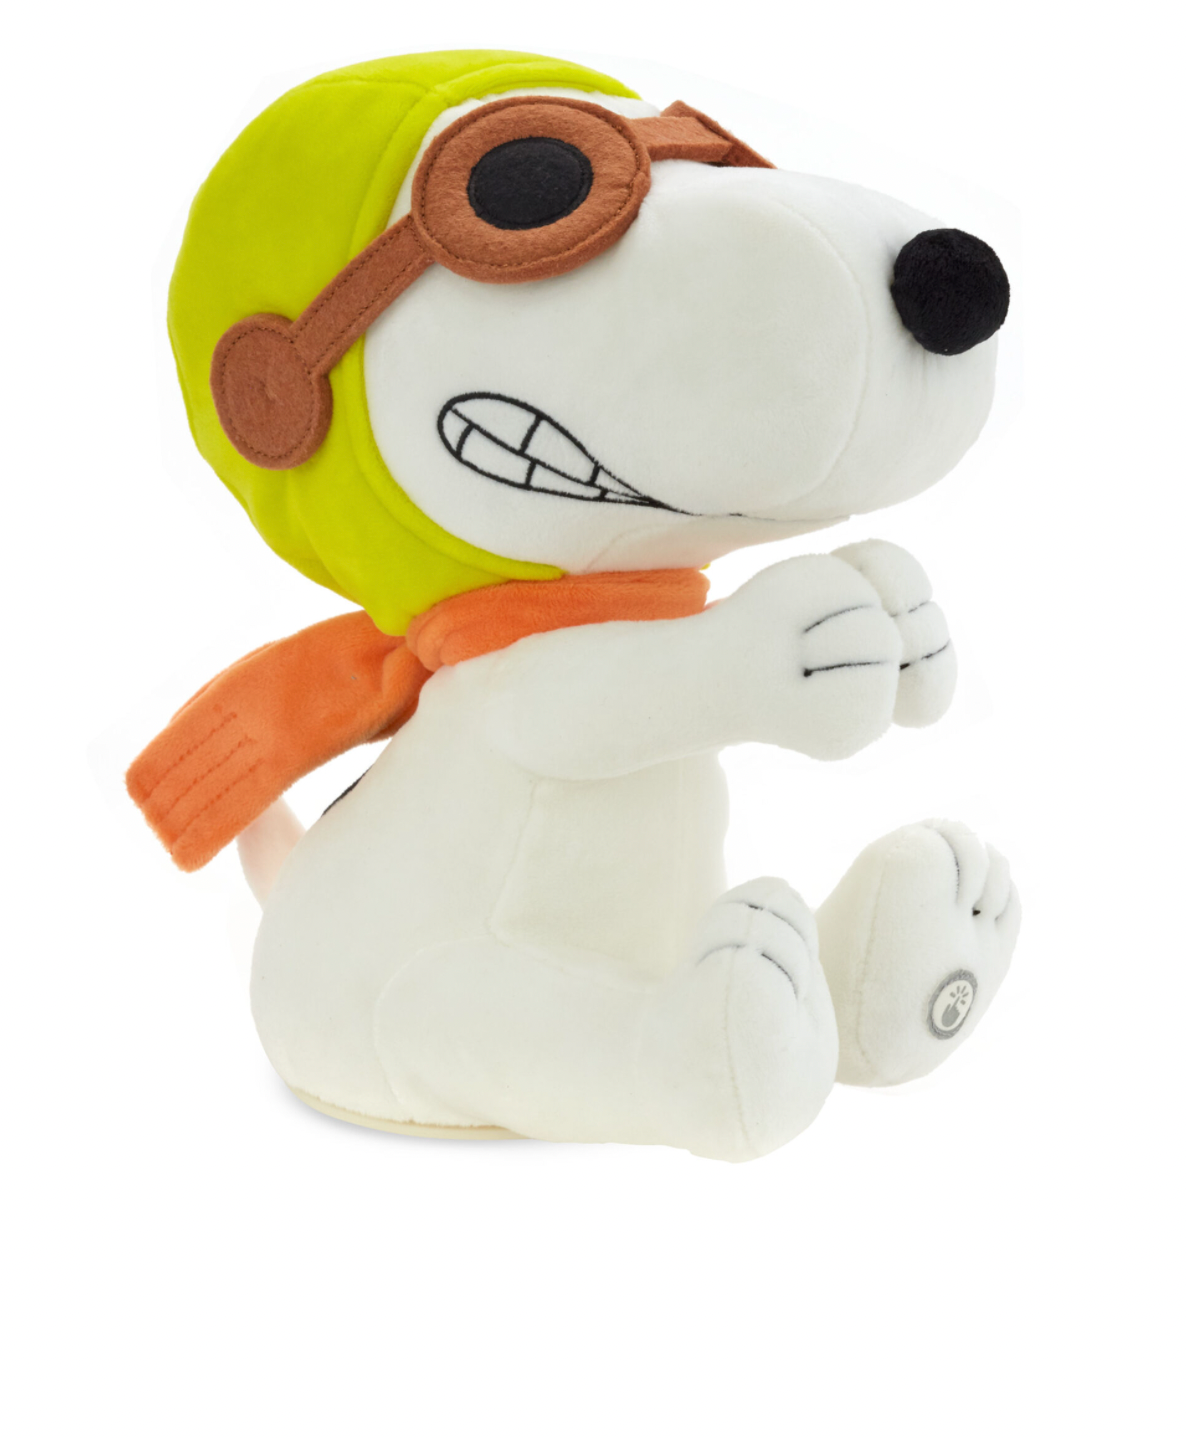 Hallmark Halloween Peanuts Snoopy Flying Ace Plush With Sound New with Tag